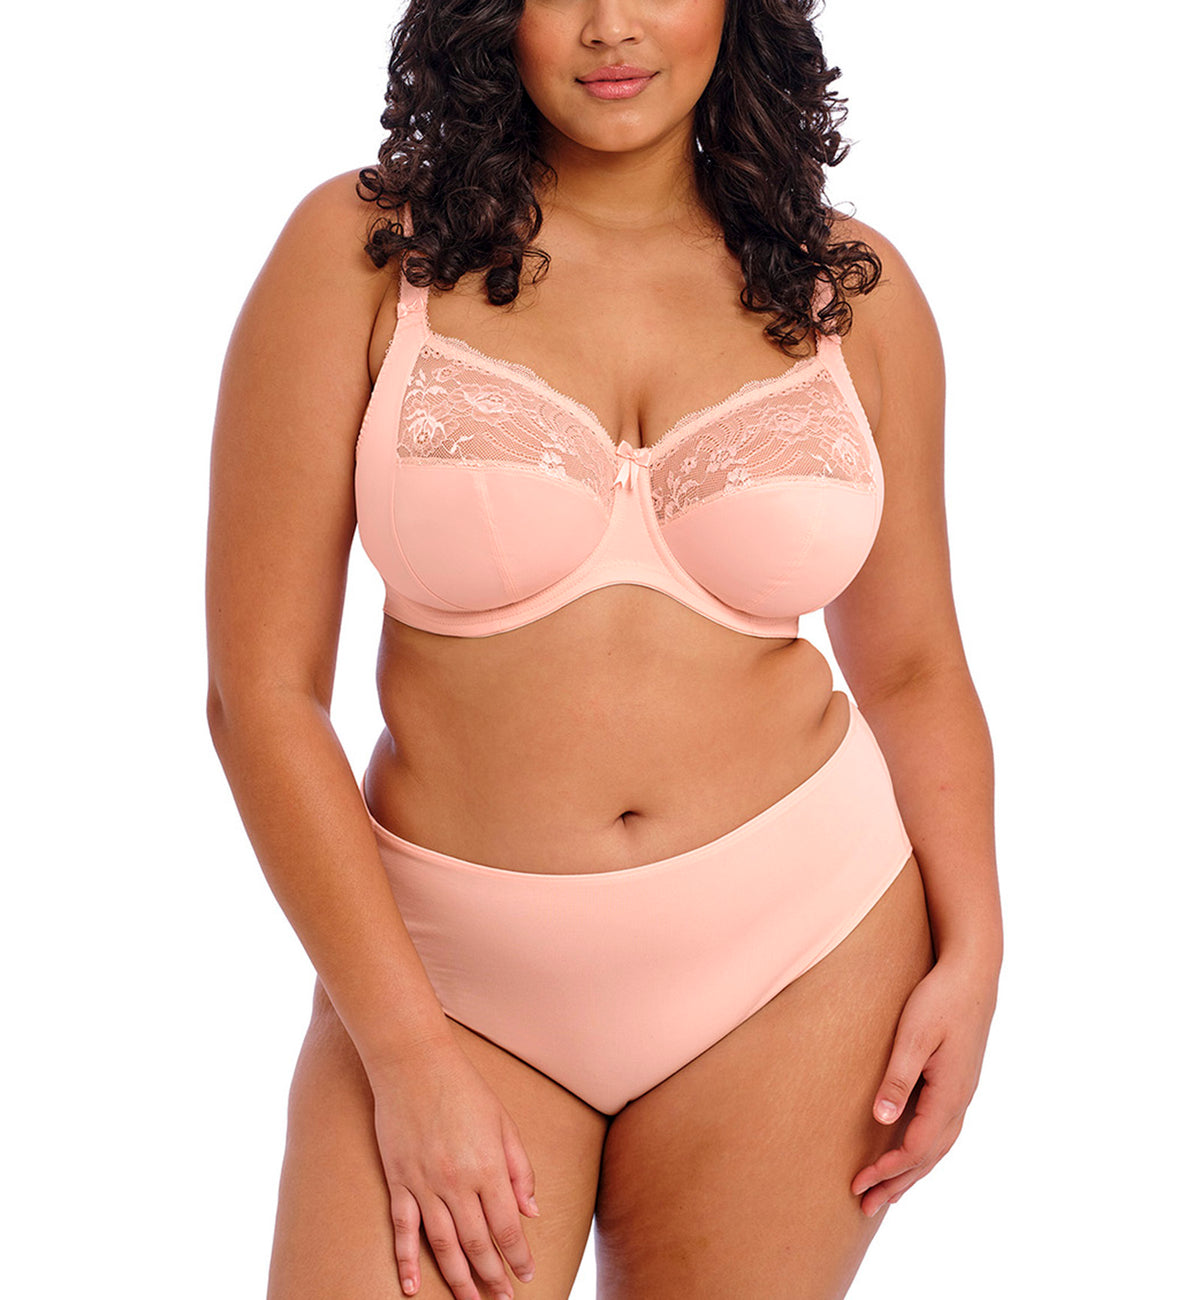 Elomi Morgan Stretch Lace Banded Underwire Bra (4111),32GG,Ballet Pink - Ballet Pink,32GG